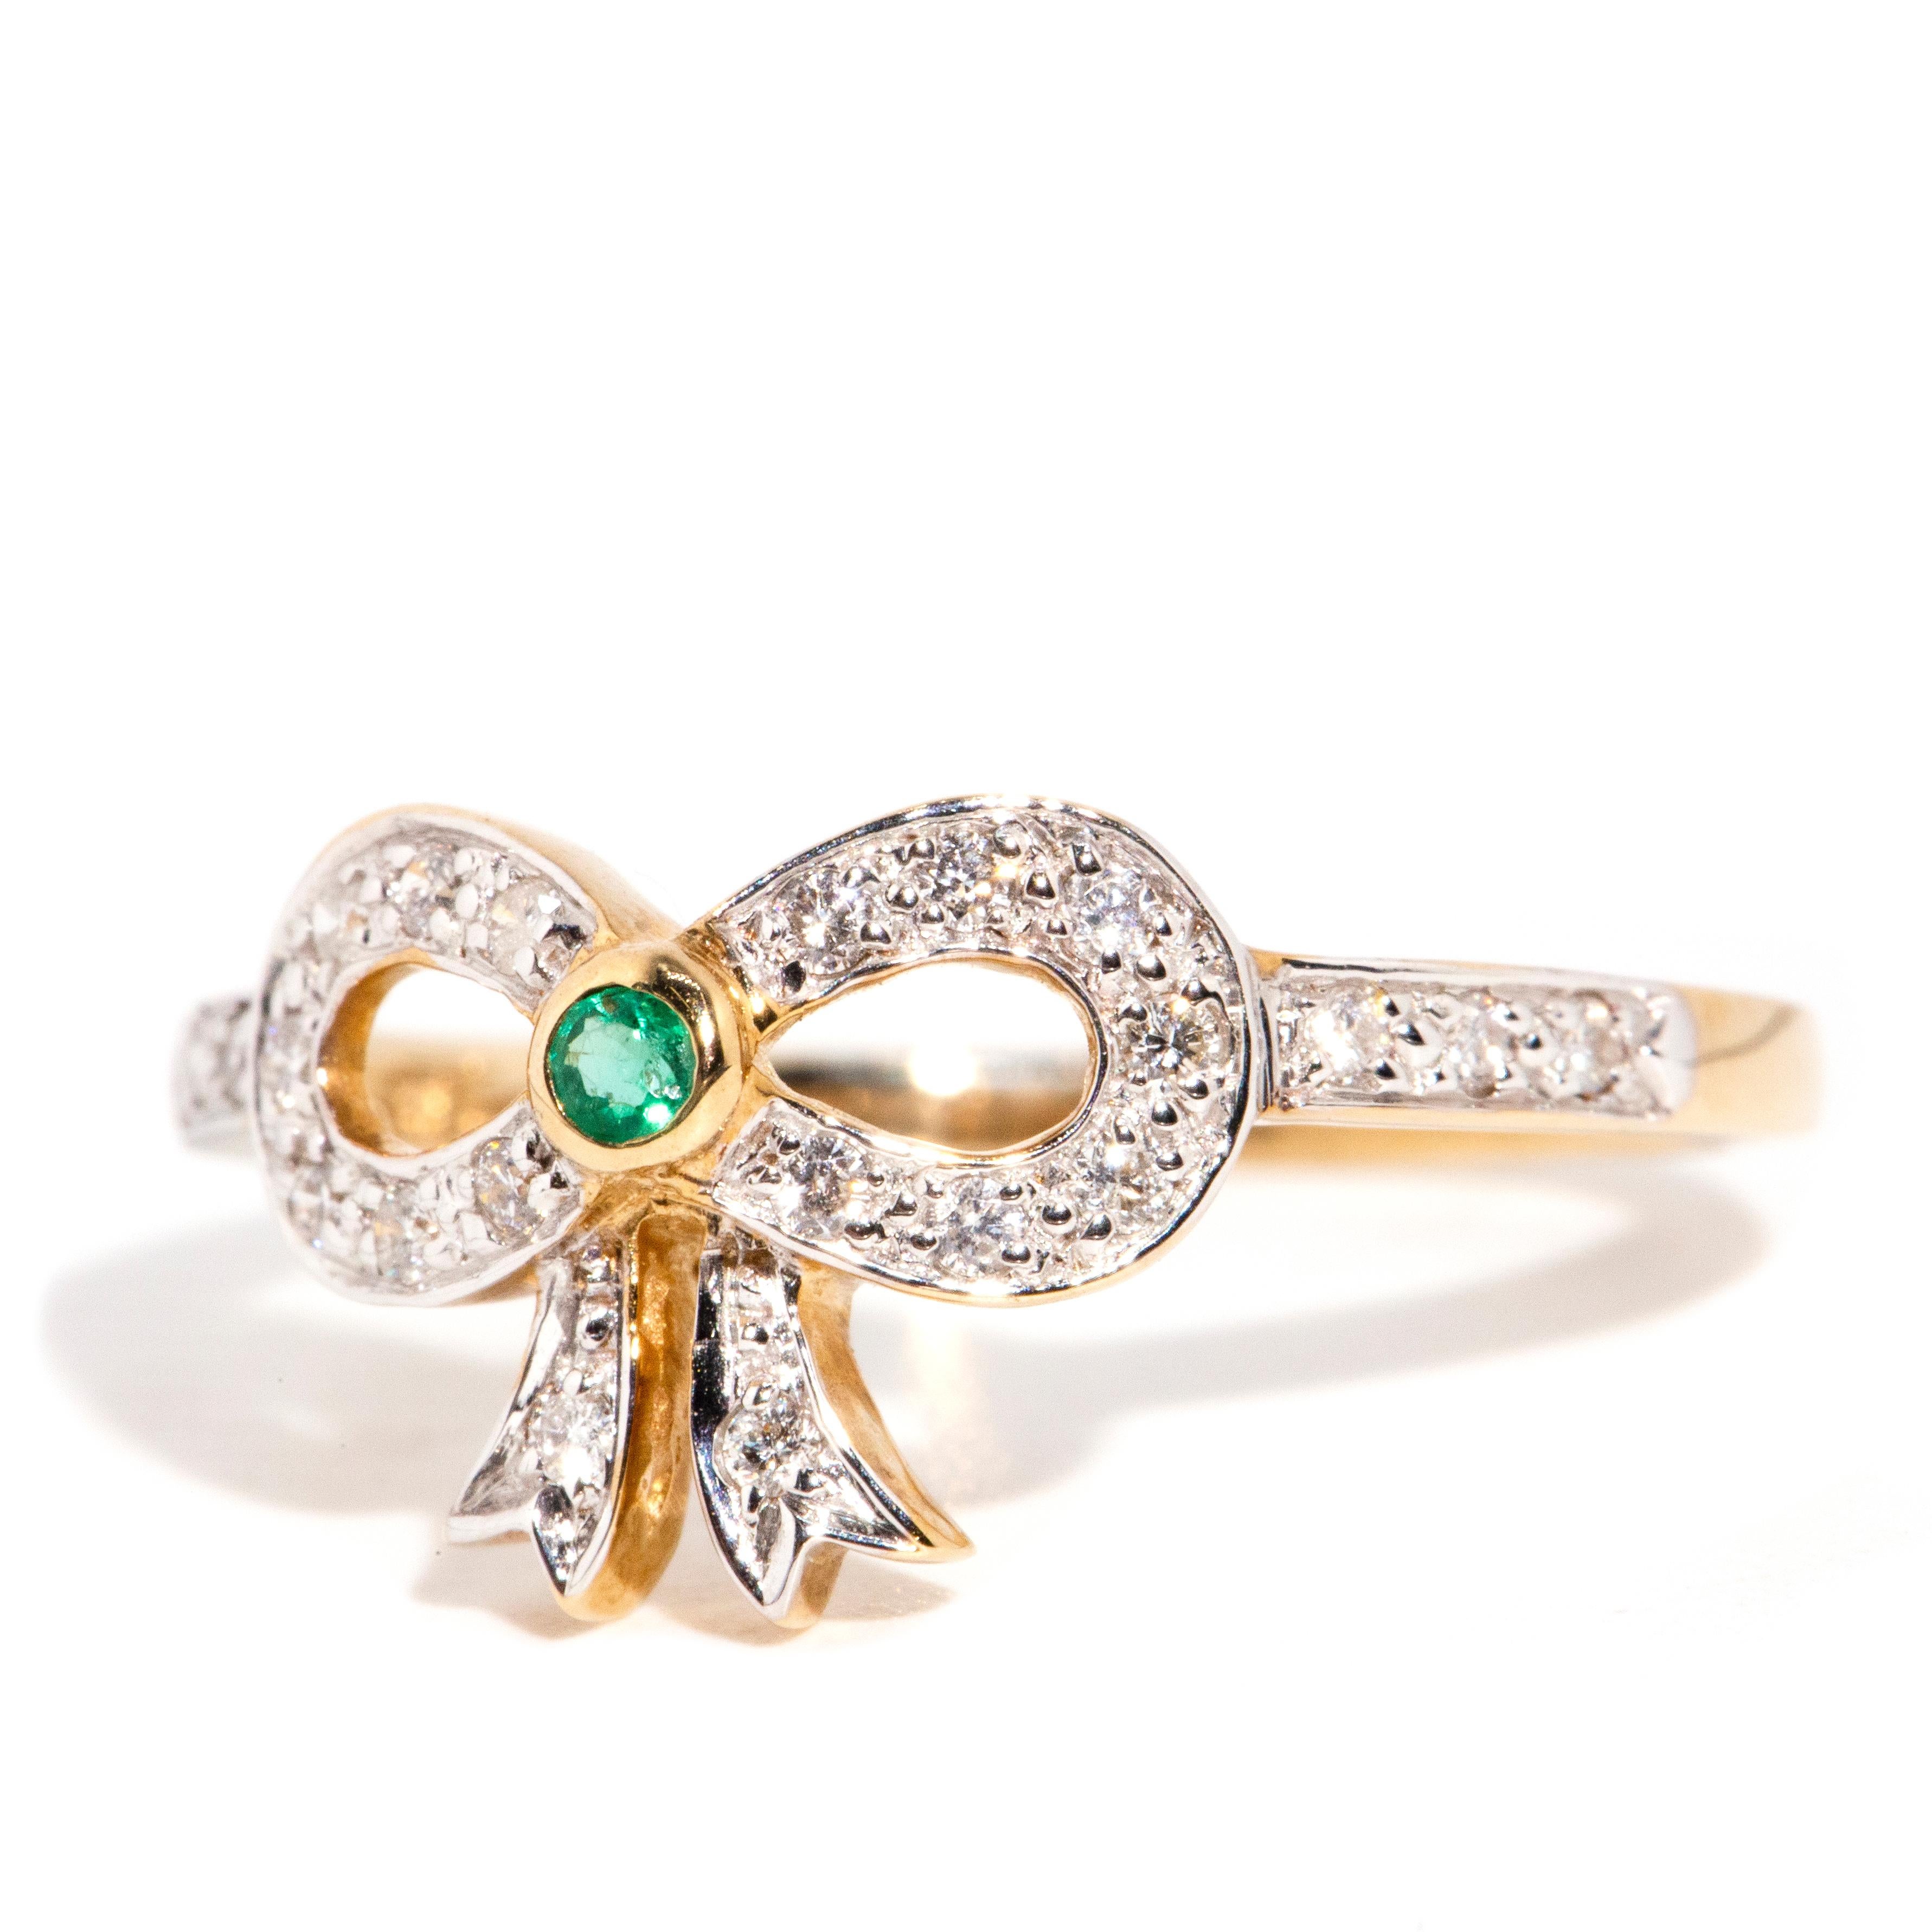 Round Cut Vintage Inspired Bright Green Emerald & Diamond Bow Ring 9 Carat Yellow Gold